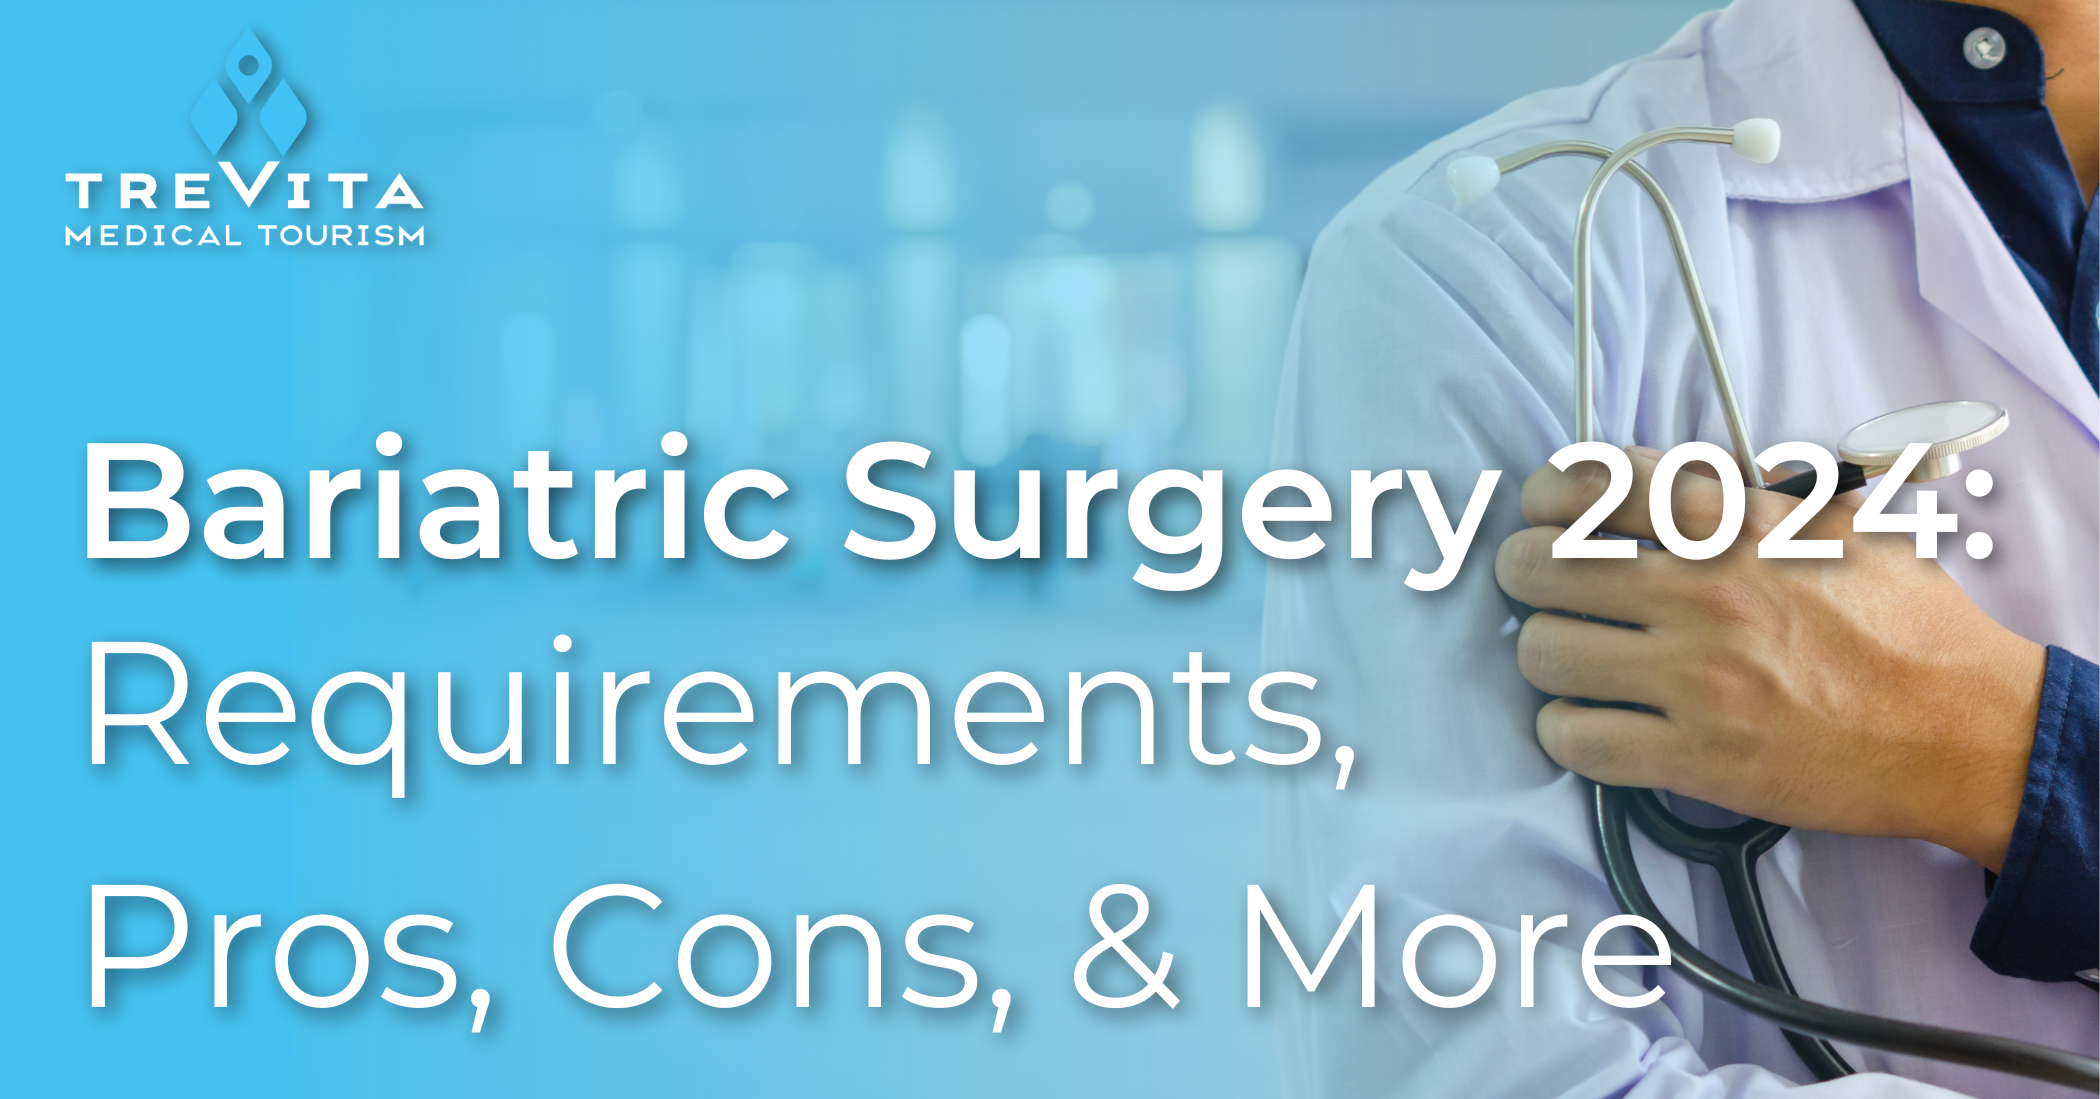 Getting Bariatric Surgery in 2024: Requirements, Pros, Cons, and More